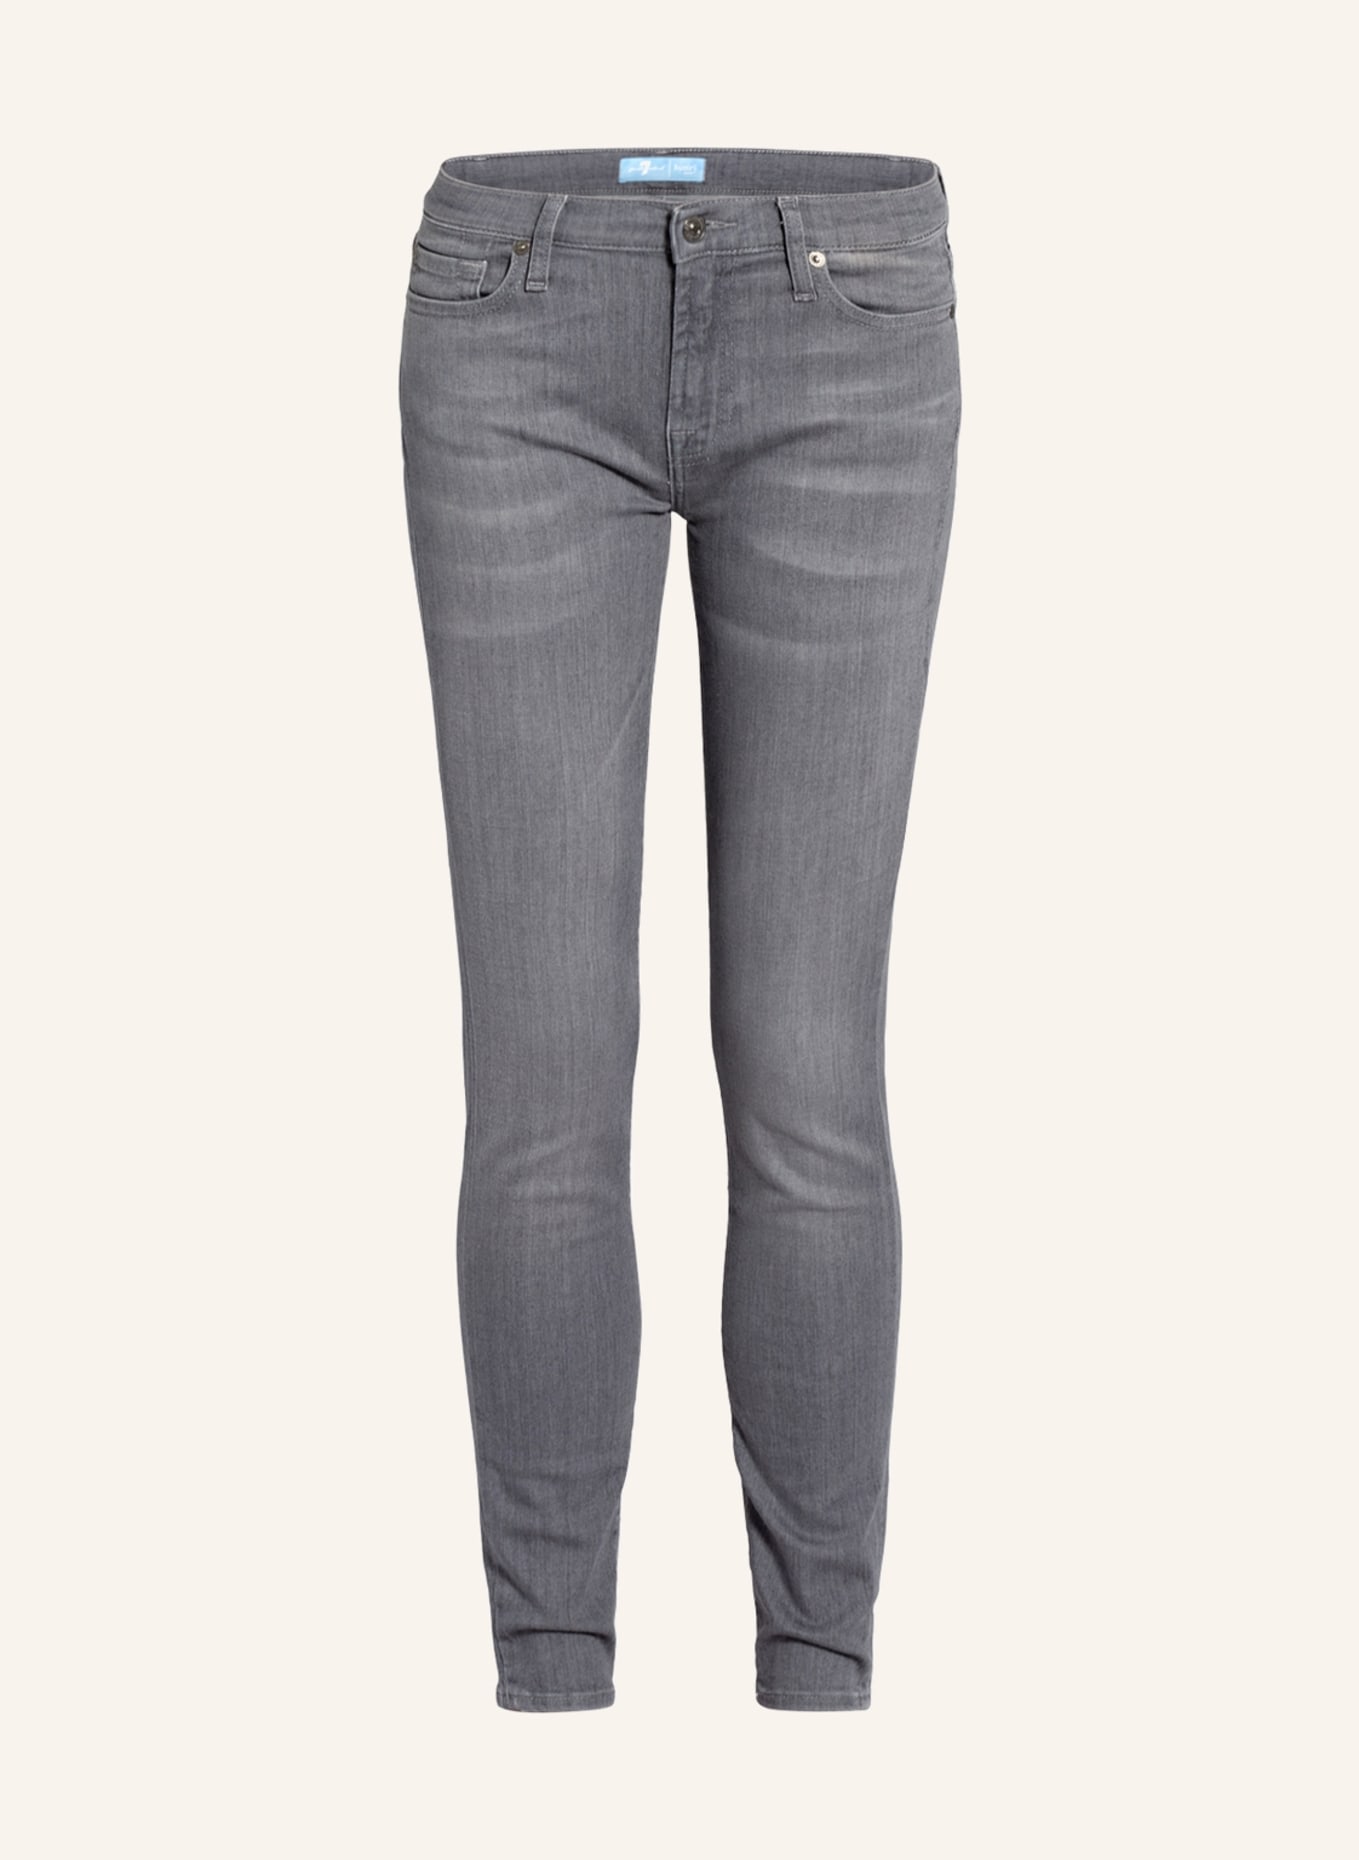 7 for all mankind Skinny jeans THE SKINNY , Color: B (air) Rocket GREY (Image 1)